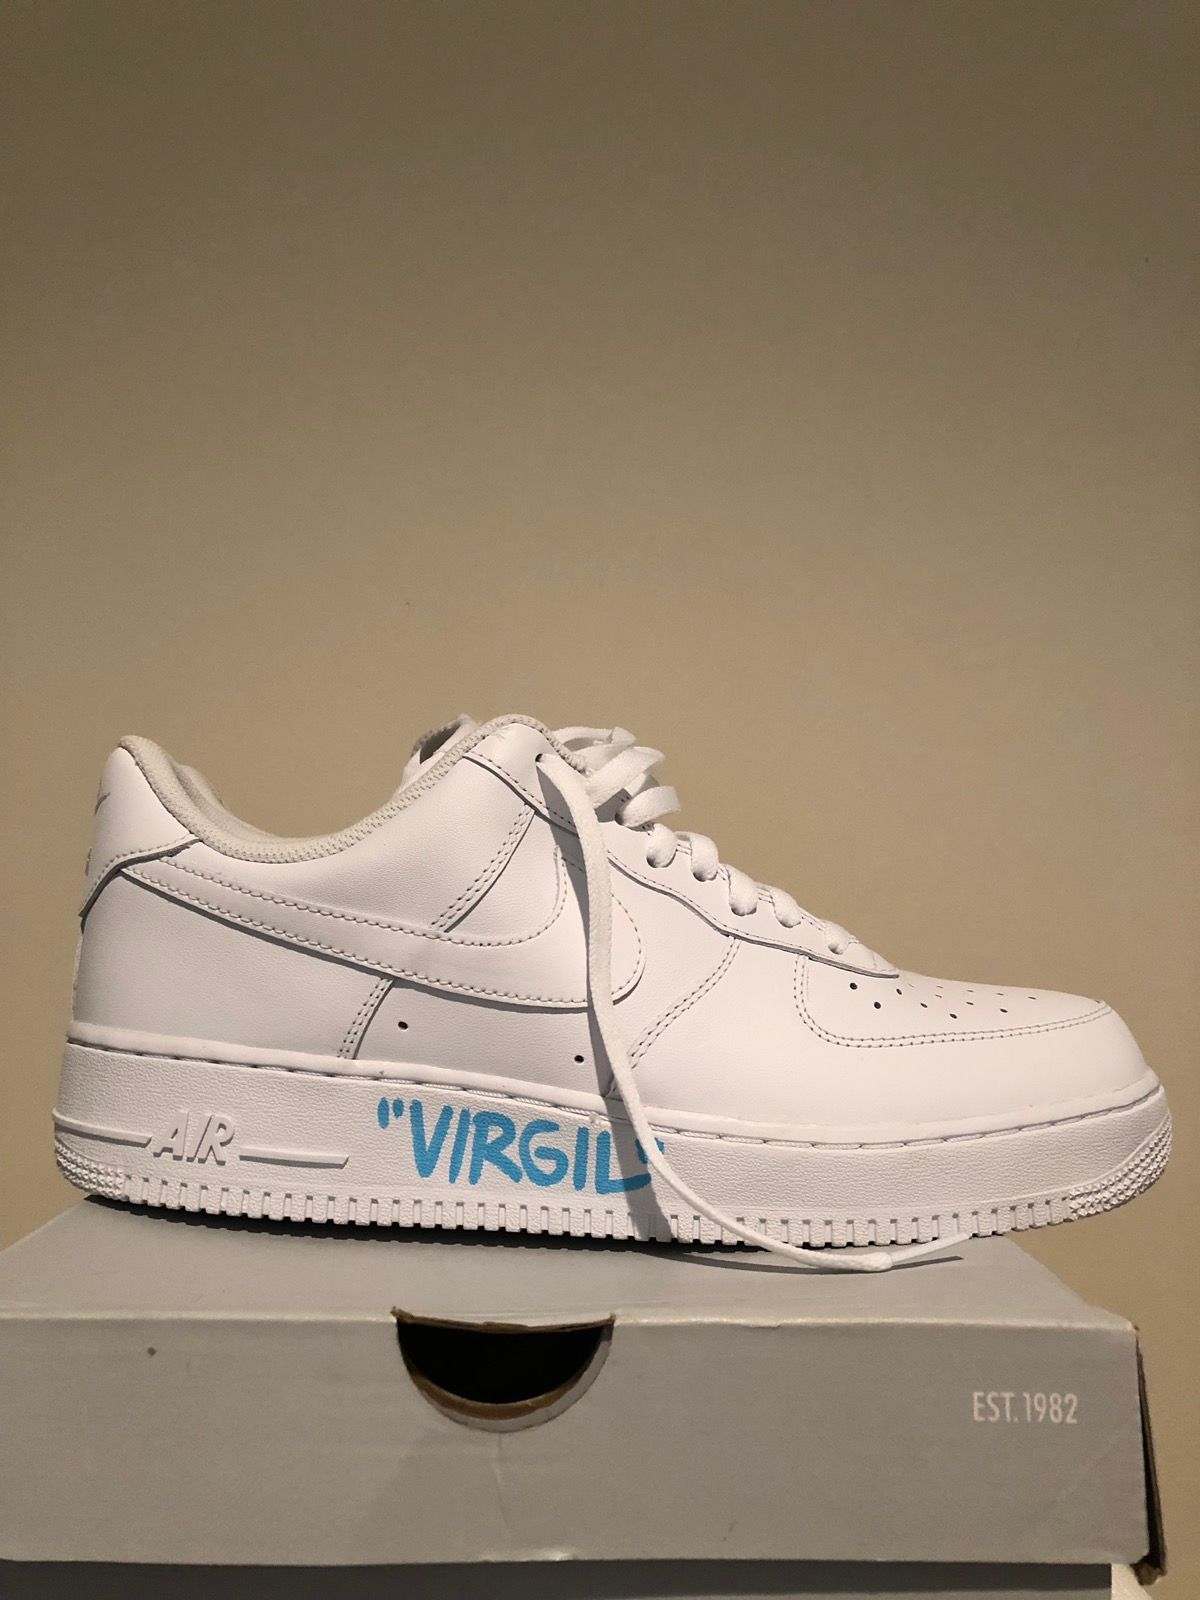 Nike Air Force 1 'SSENSE x Virgil Abloh' Signed by Virgil Abloh, US 8, String Theory, 2022